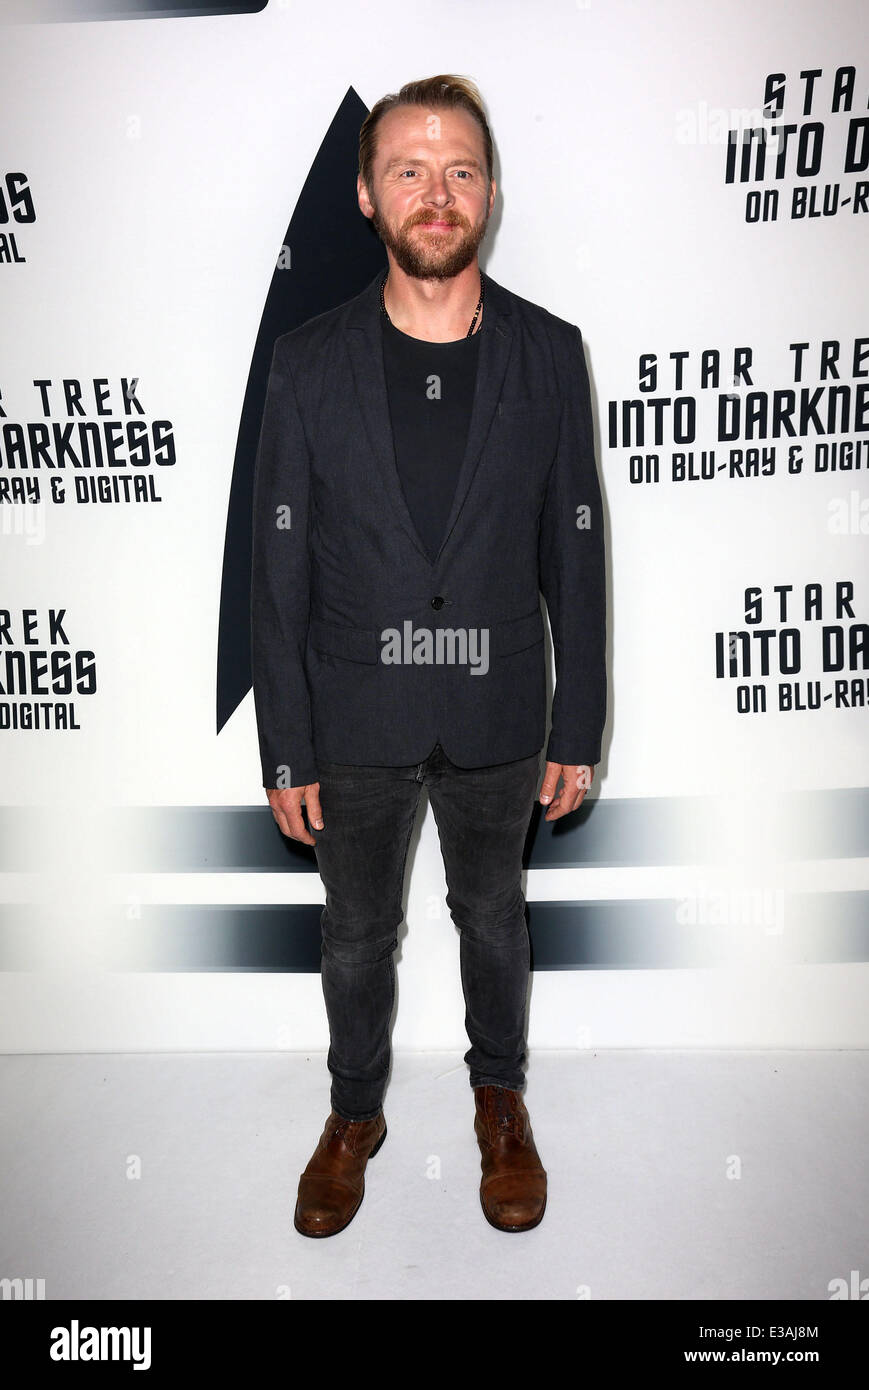 'Star Trek: Into Darkness' Blu-ray and DVD debut at California Science Center  Featuring: Simon Pegg Where: Los Angeles, California, United States When: 10 Sep 2013 Stock Photo